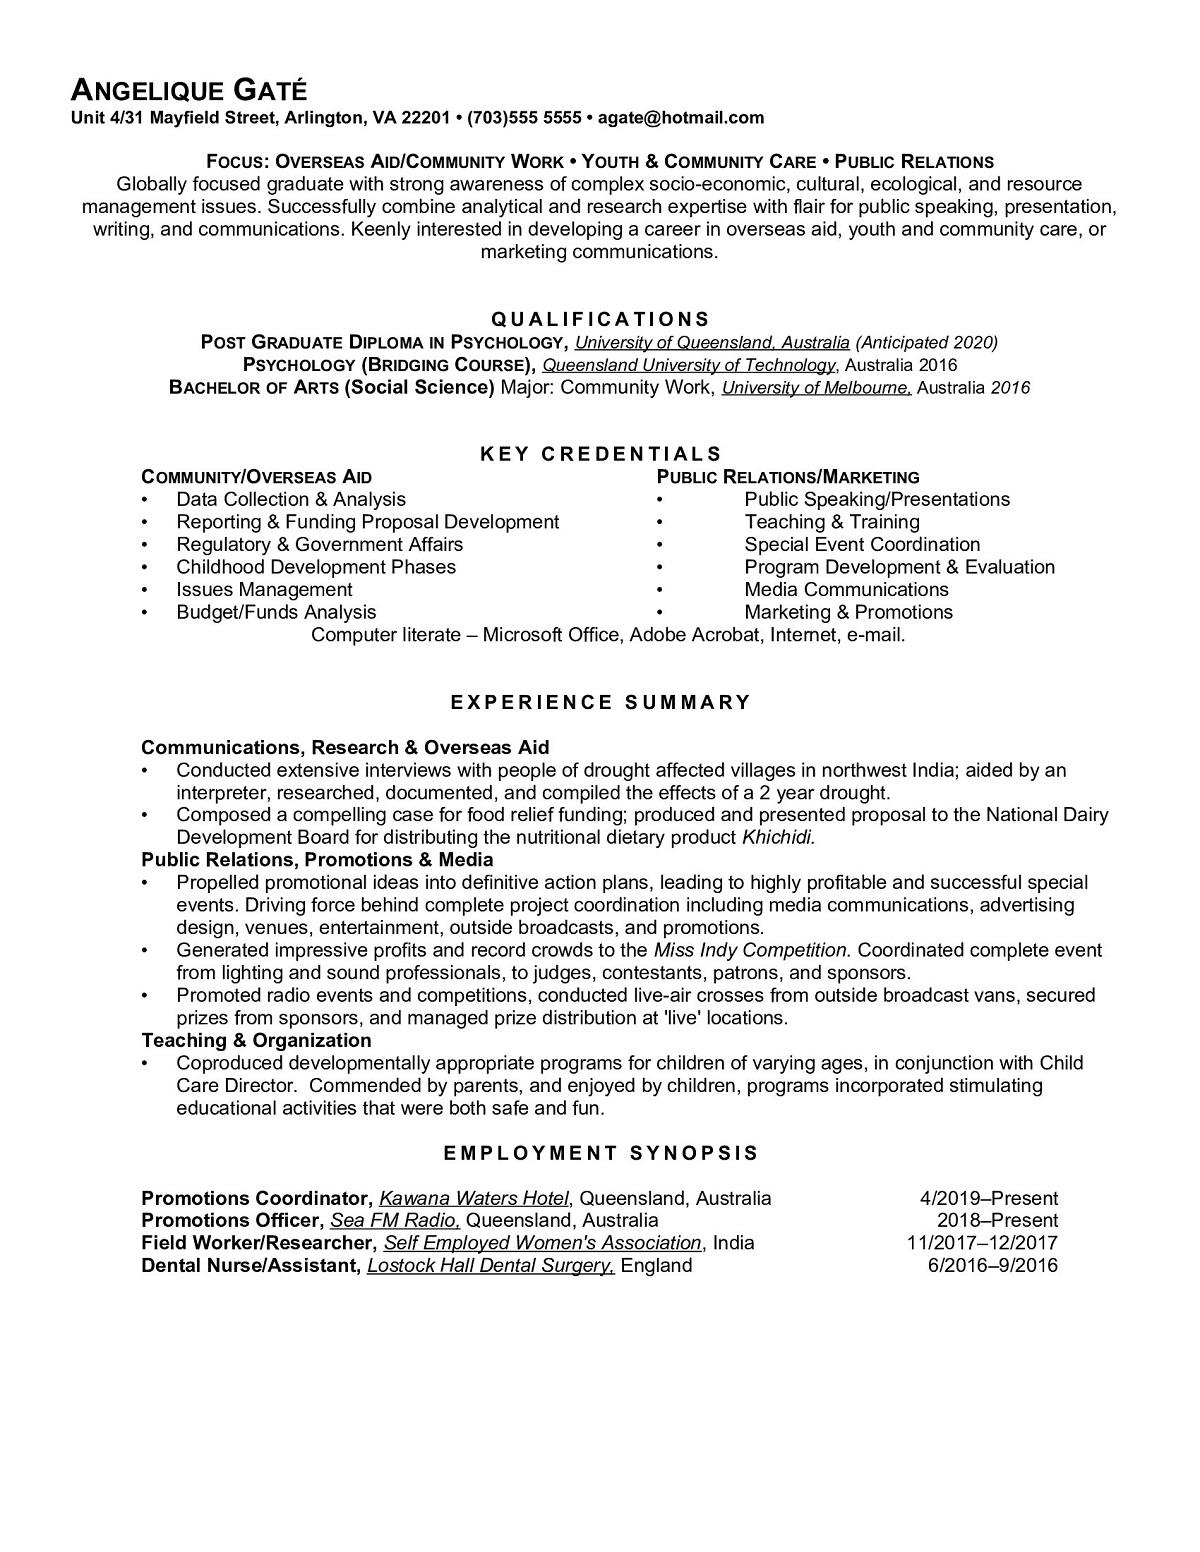 Sample resume: Public Relations, Entry Level, Functional